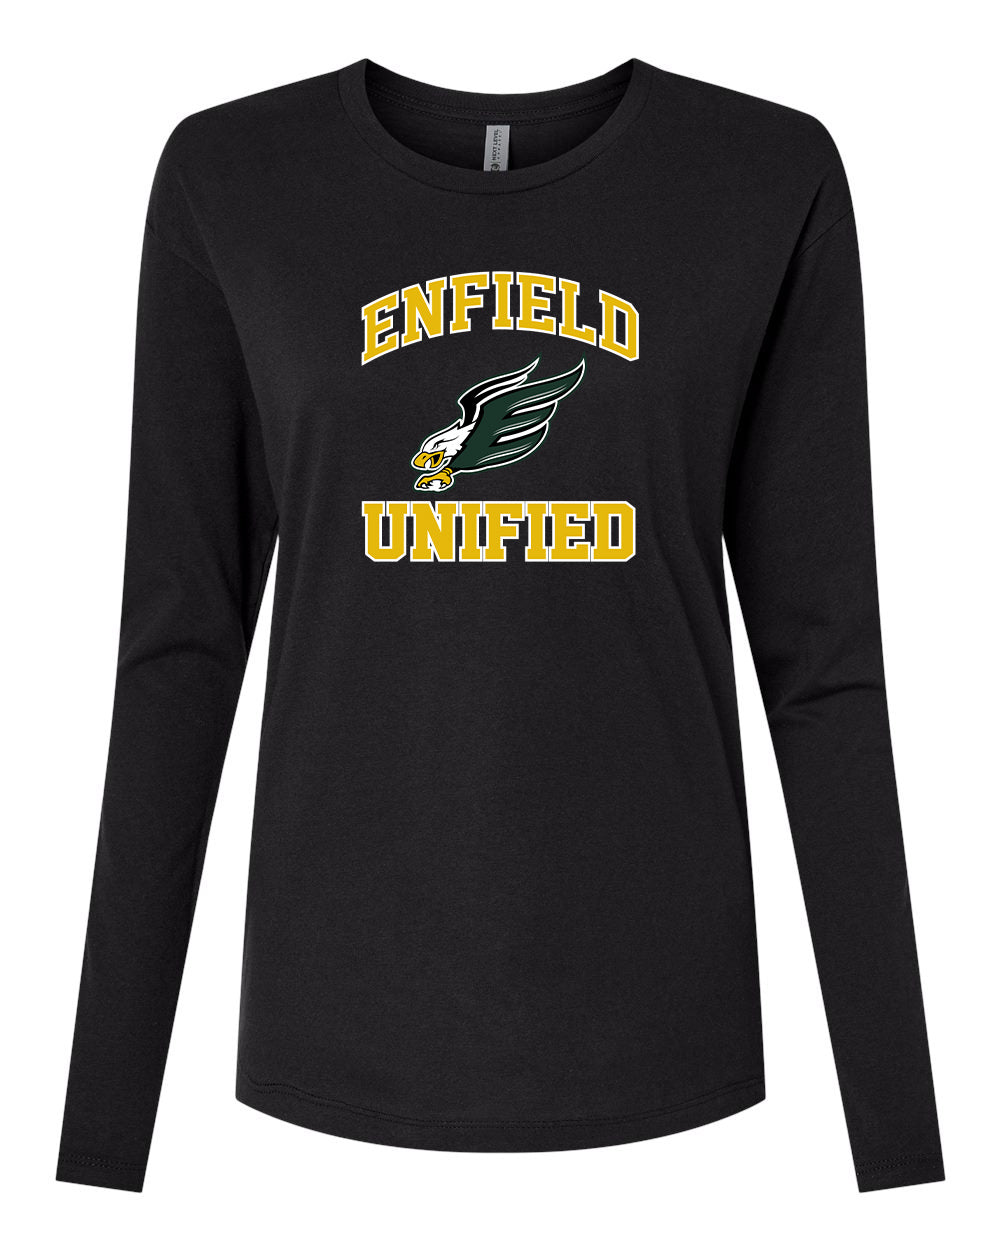 Unified Ladies Longsleeve Tee - 3911 (color options available)